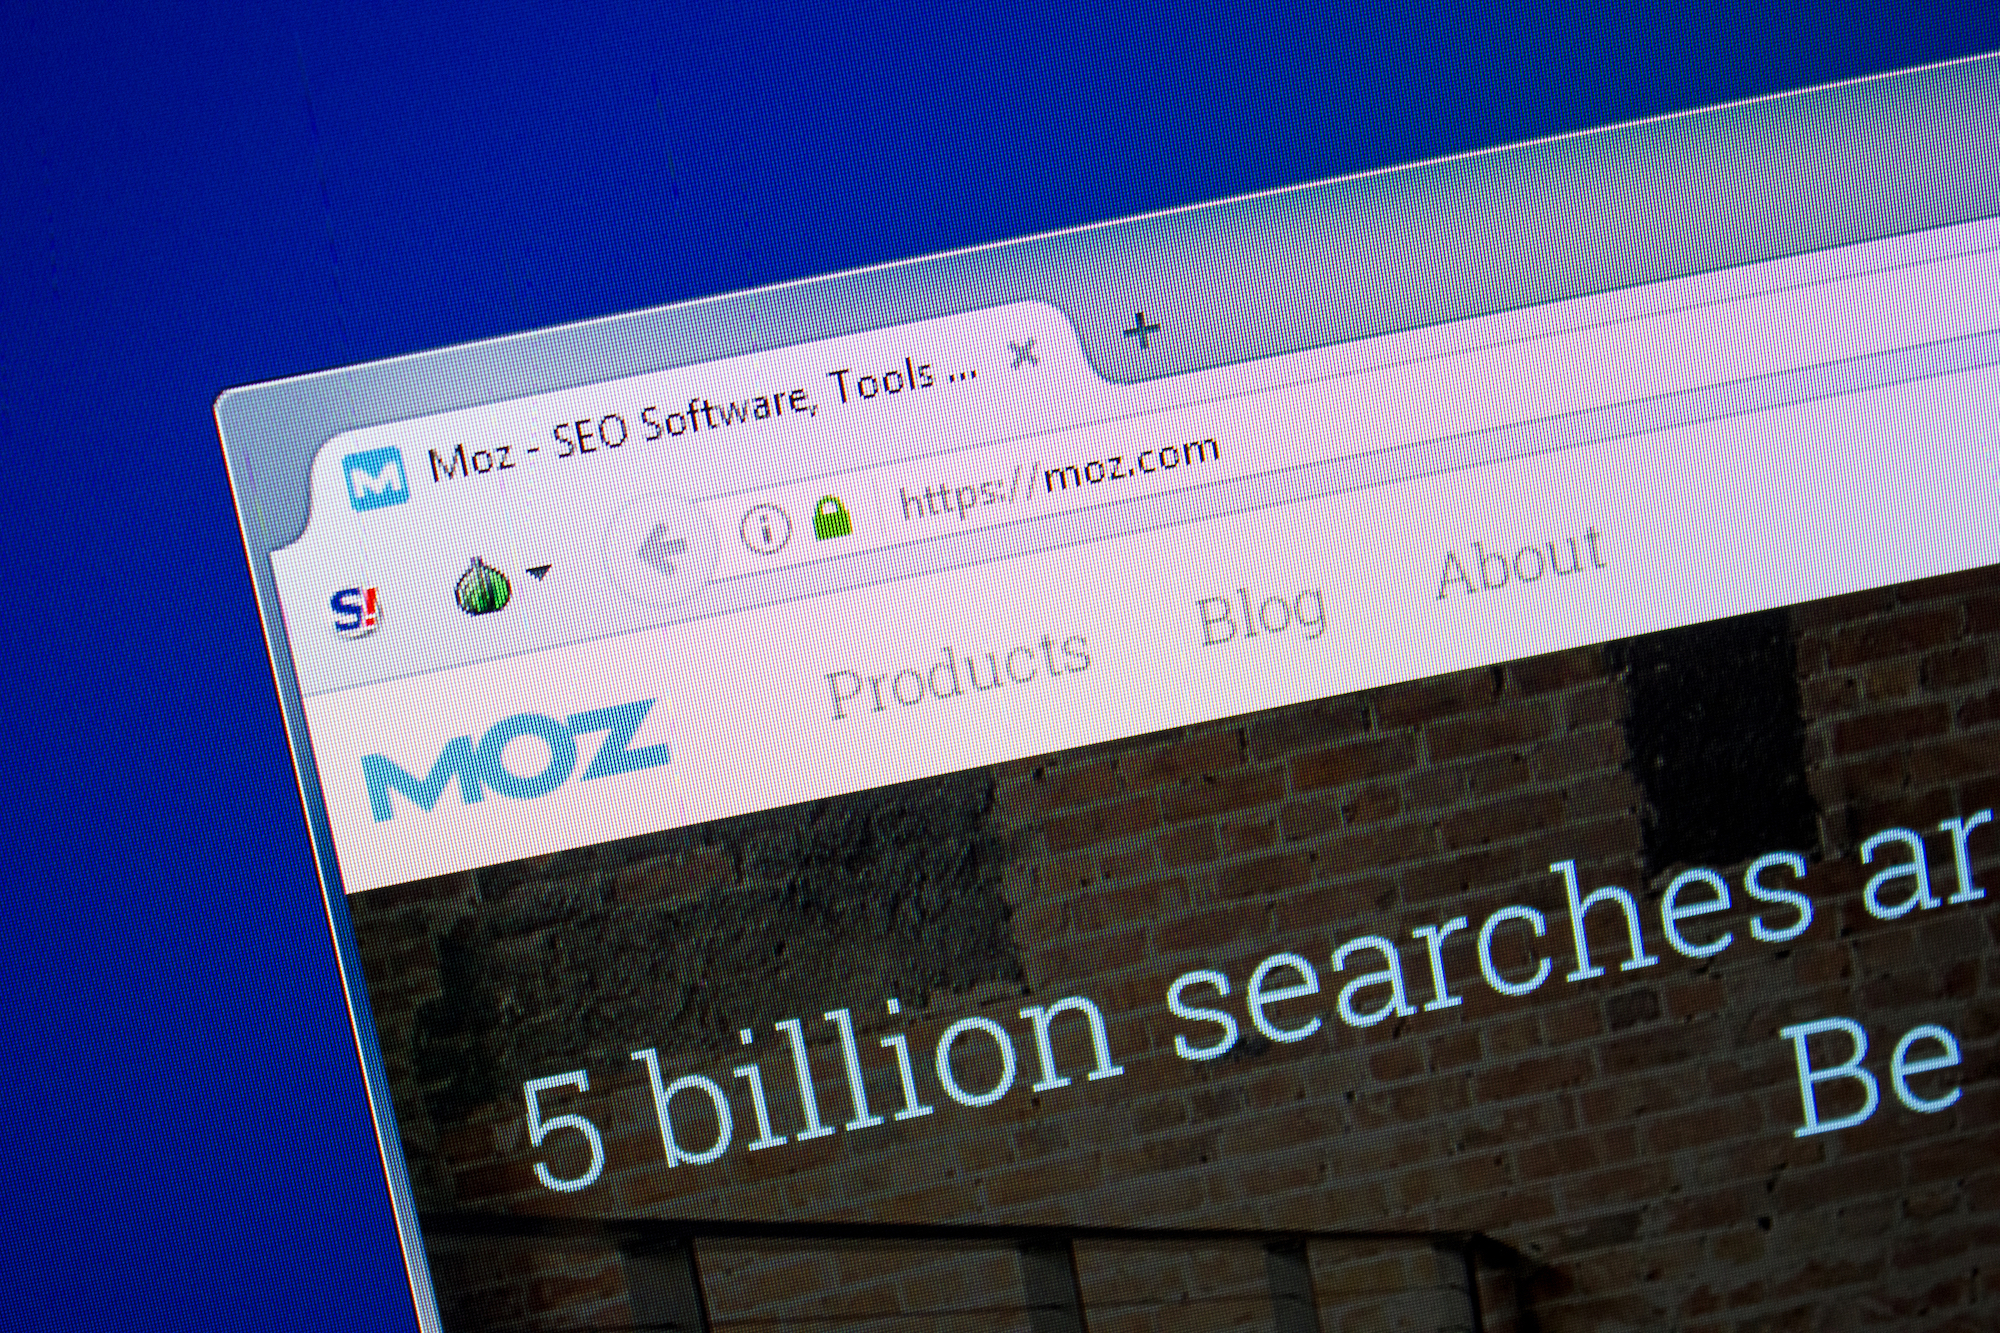 Moz Launches Brand Authority Metric At MozCon With Top 500 US Brands List